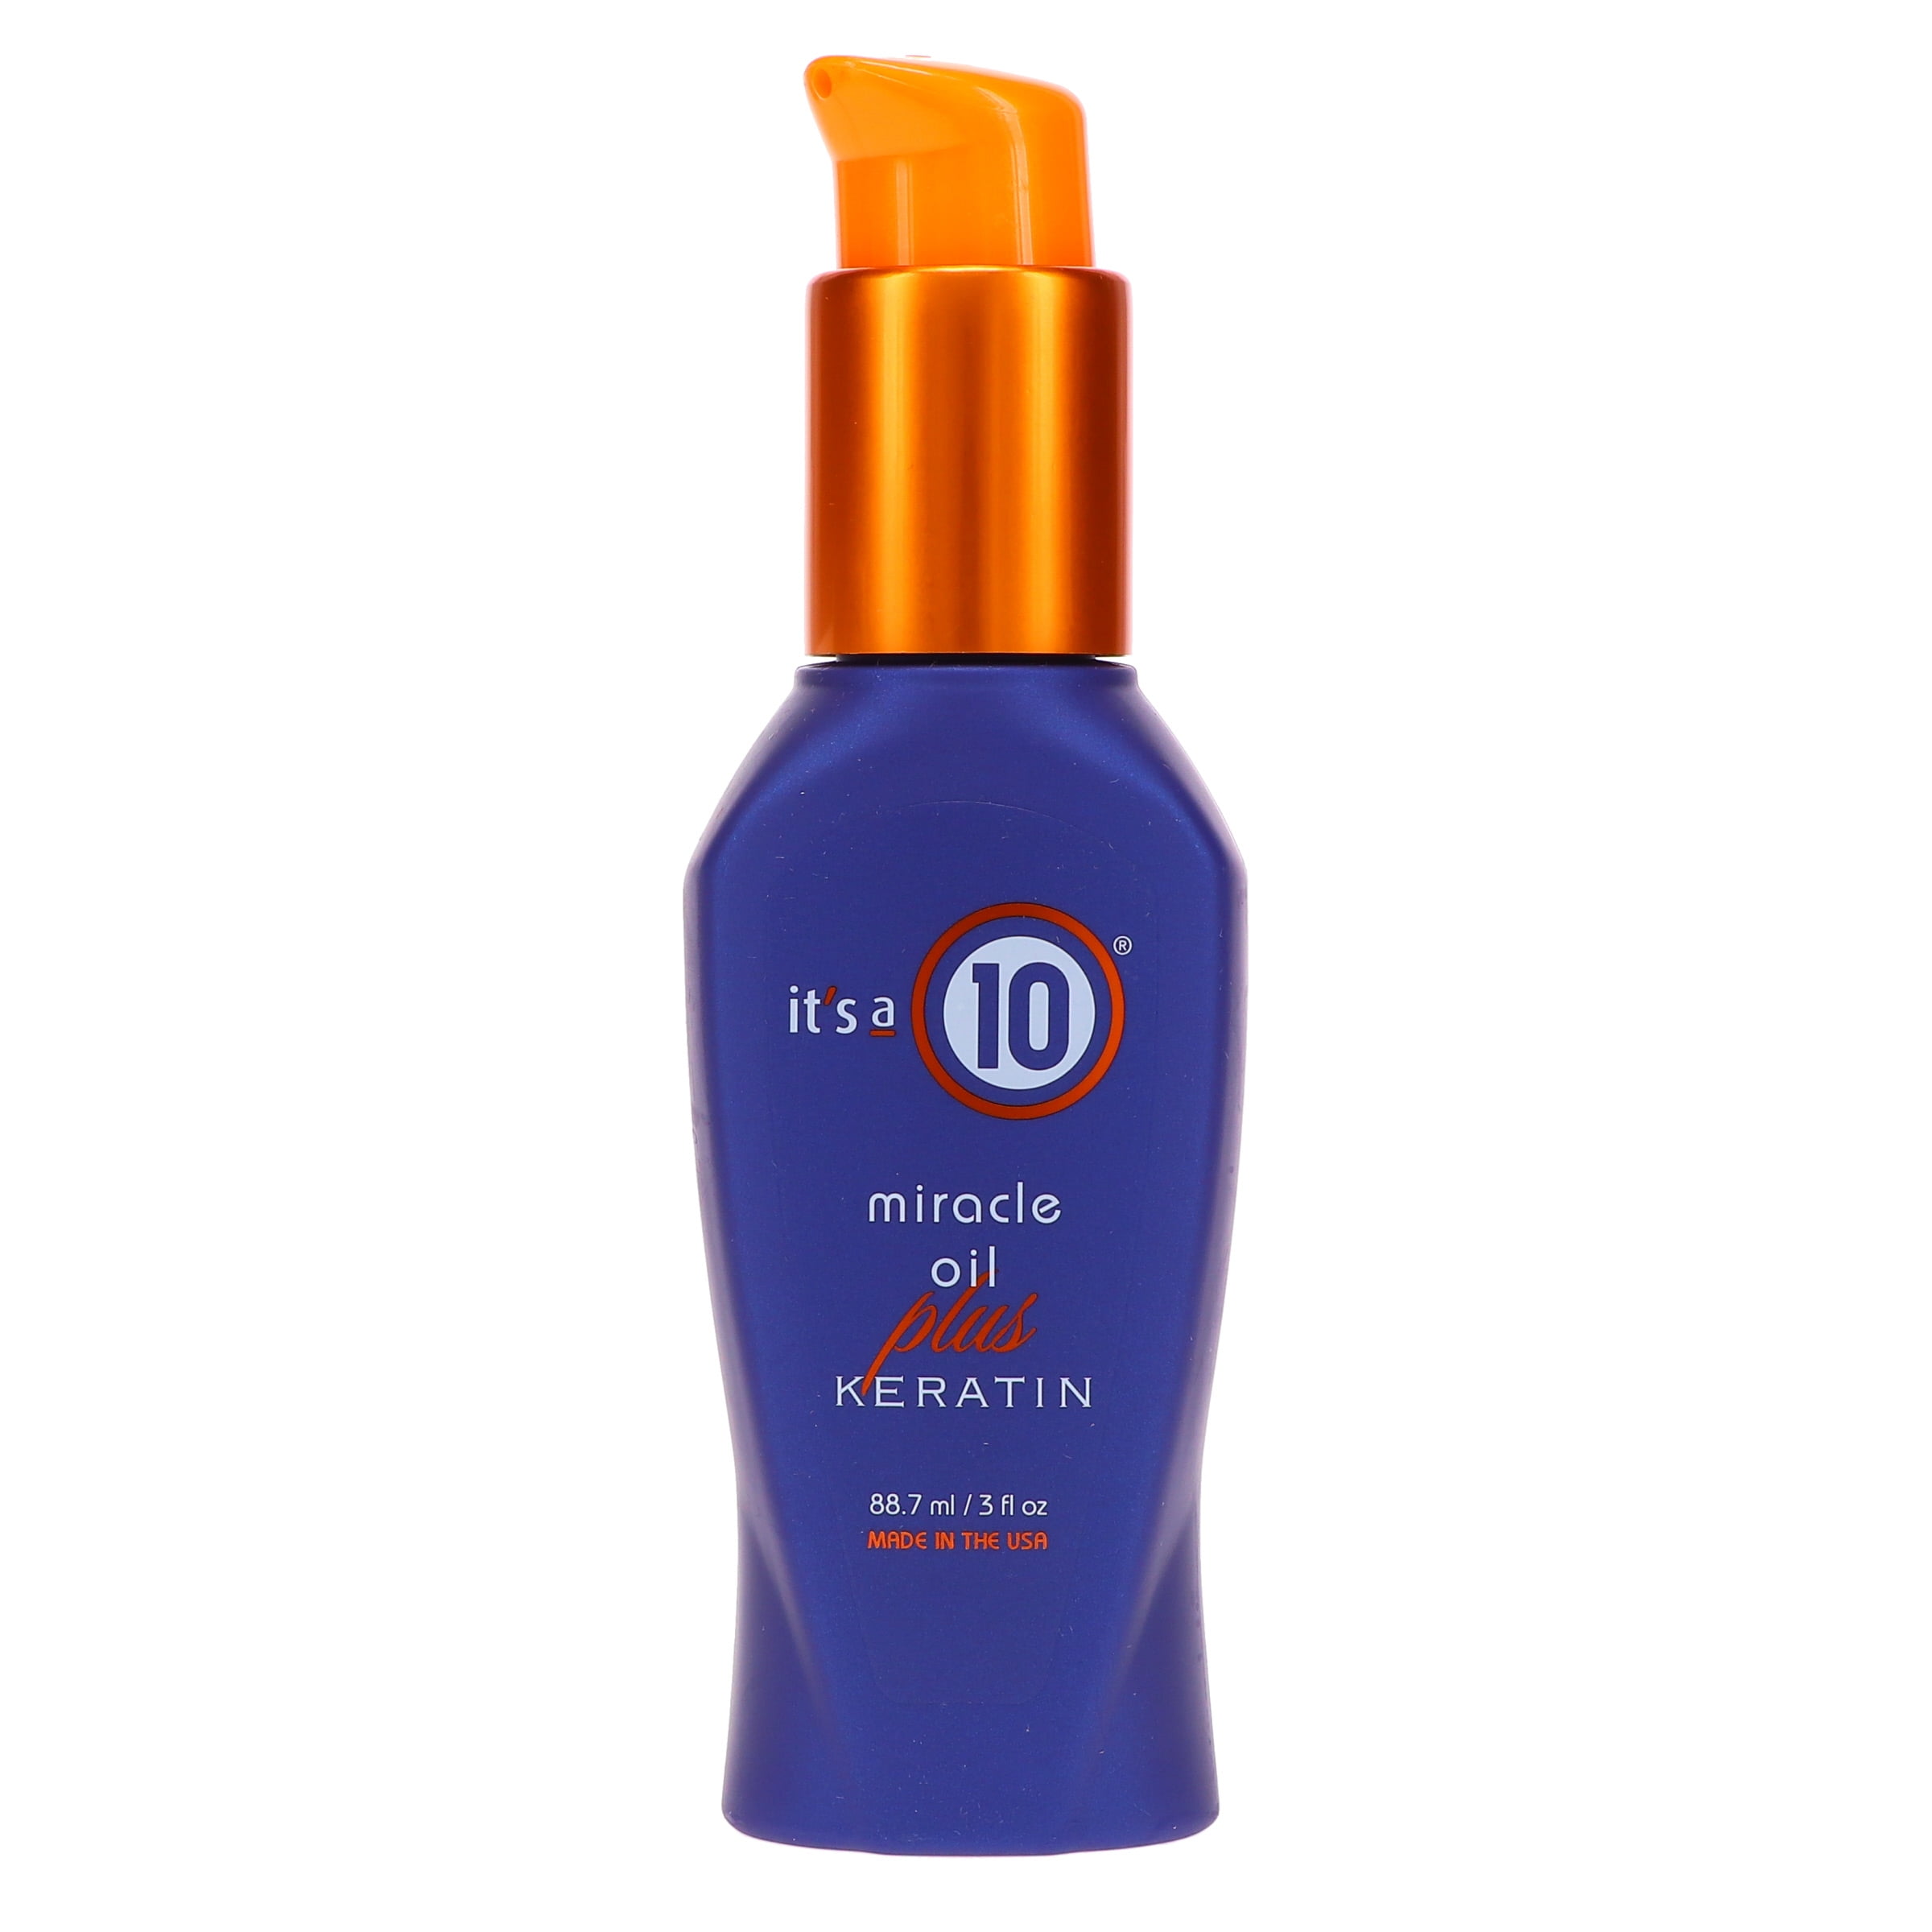 It's a 10 Miracle Oil Plus Keratin 3 oz - image 1 of 8